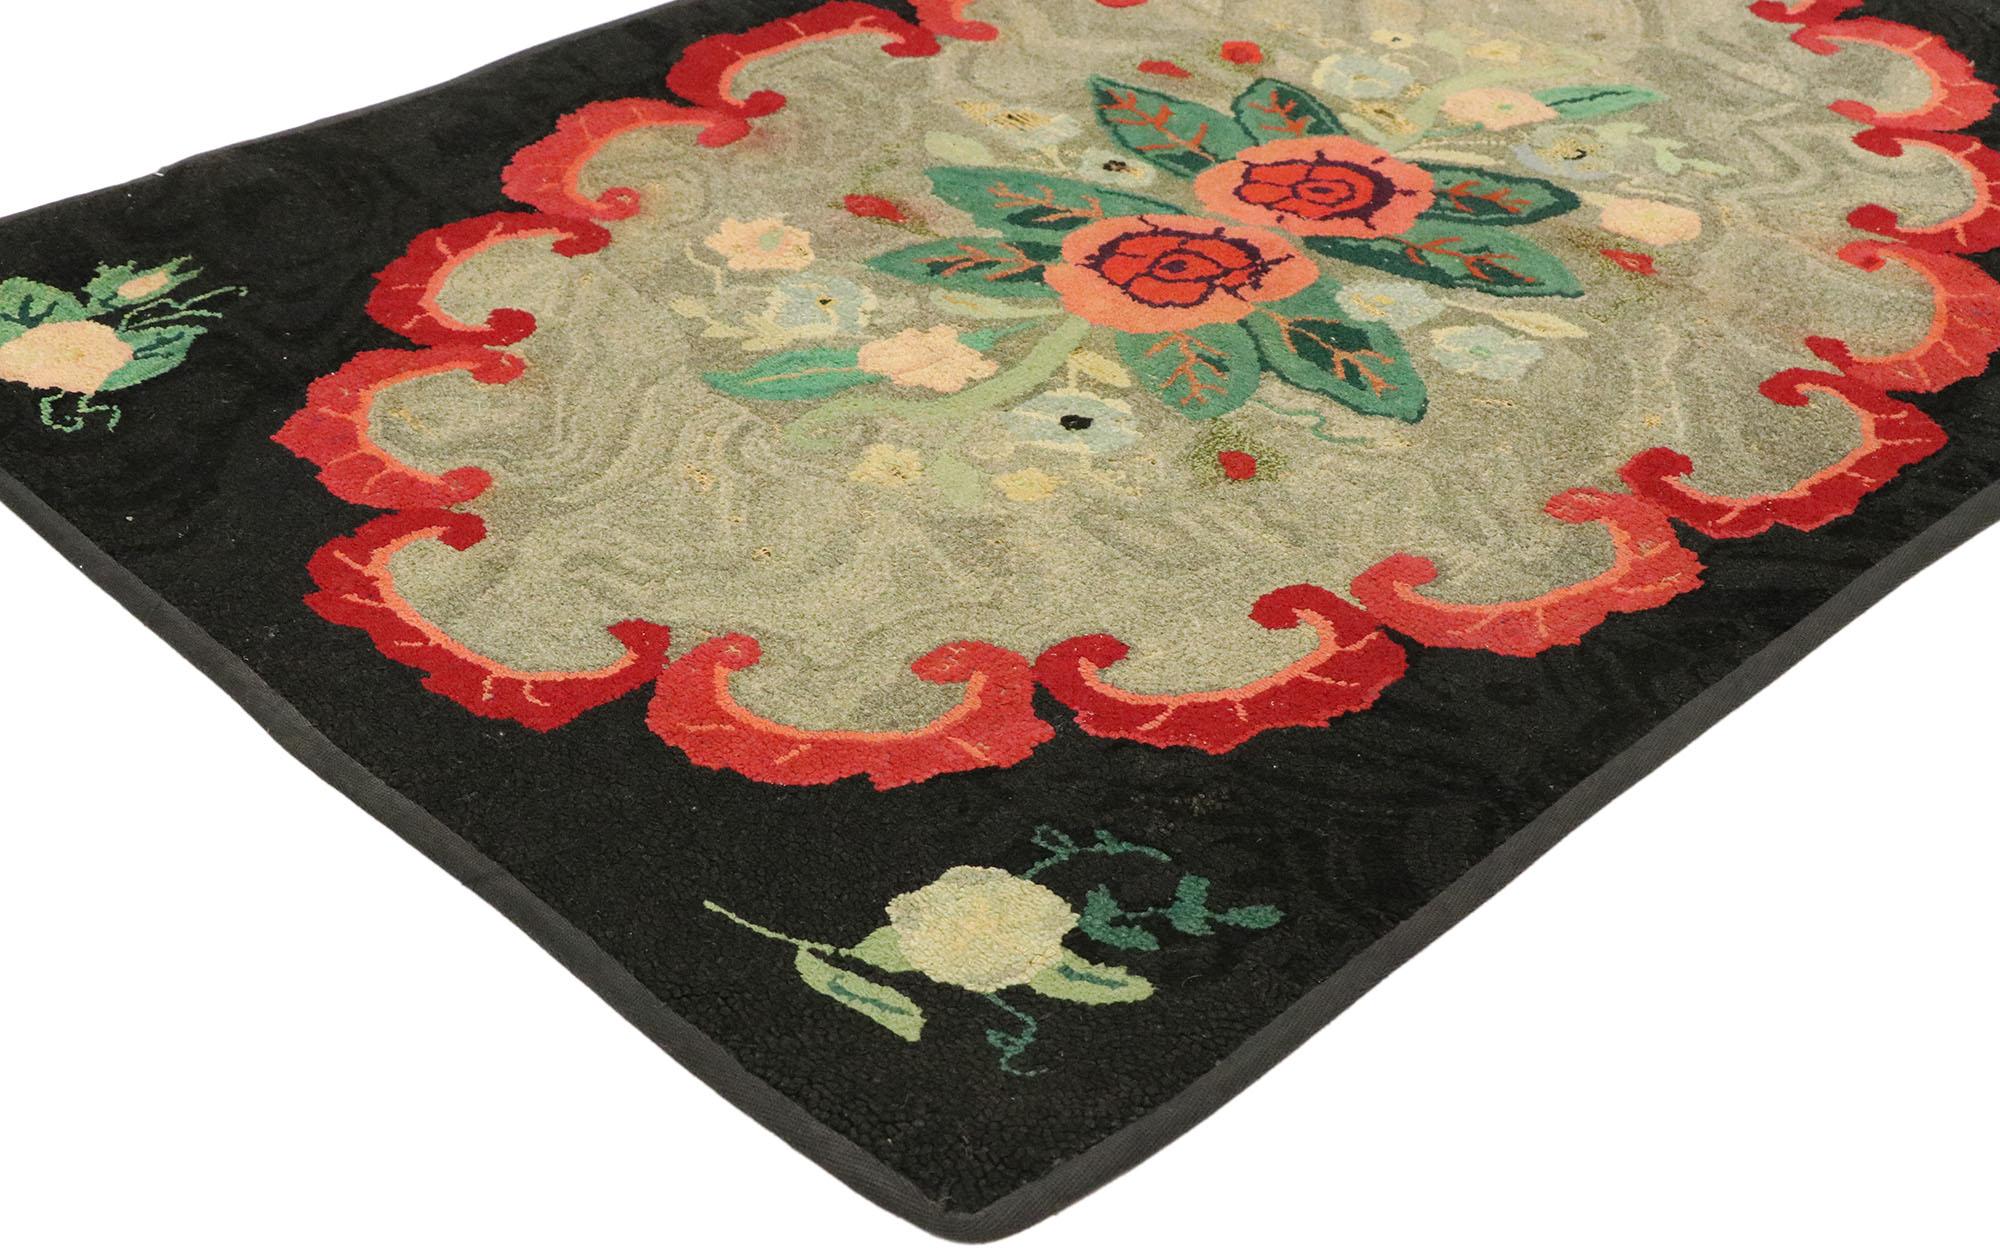 74357, distressed antique American hooked floral rug with Cozy cottage colonial style. With its Folk Art vibes and cozy cottage Colonial style, this antique American hooked rug charms with ease. The antique hooked rug features an abrashed gray field